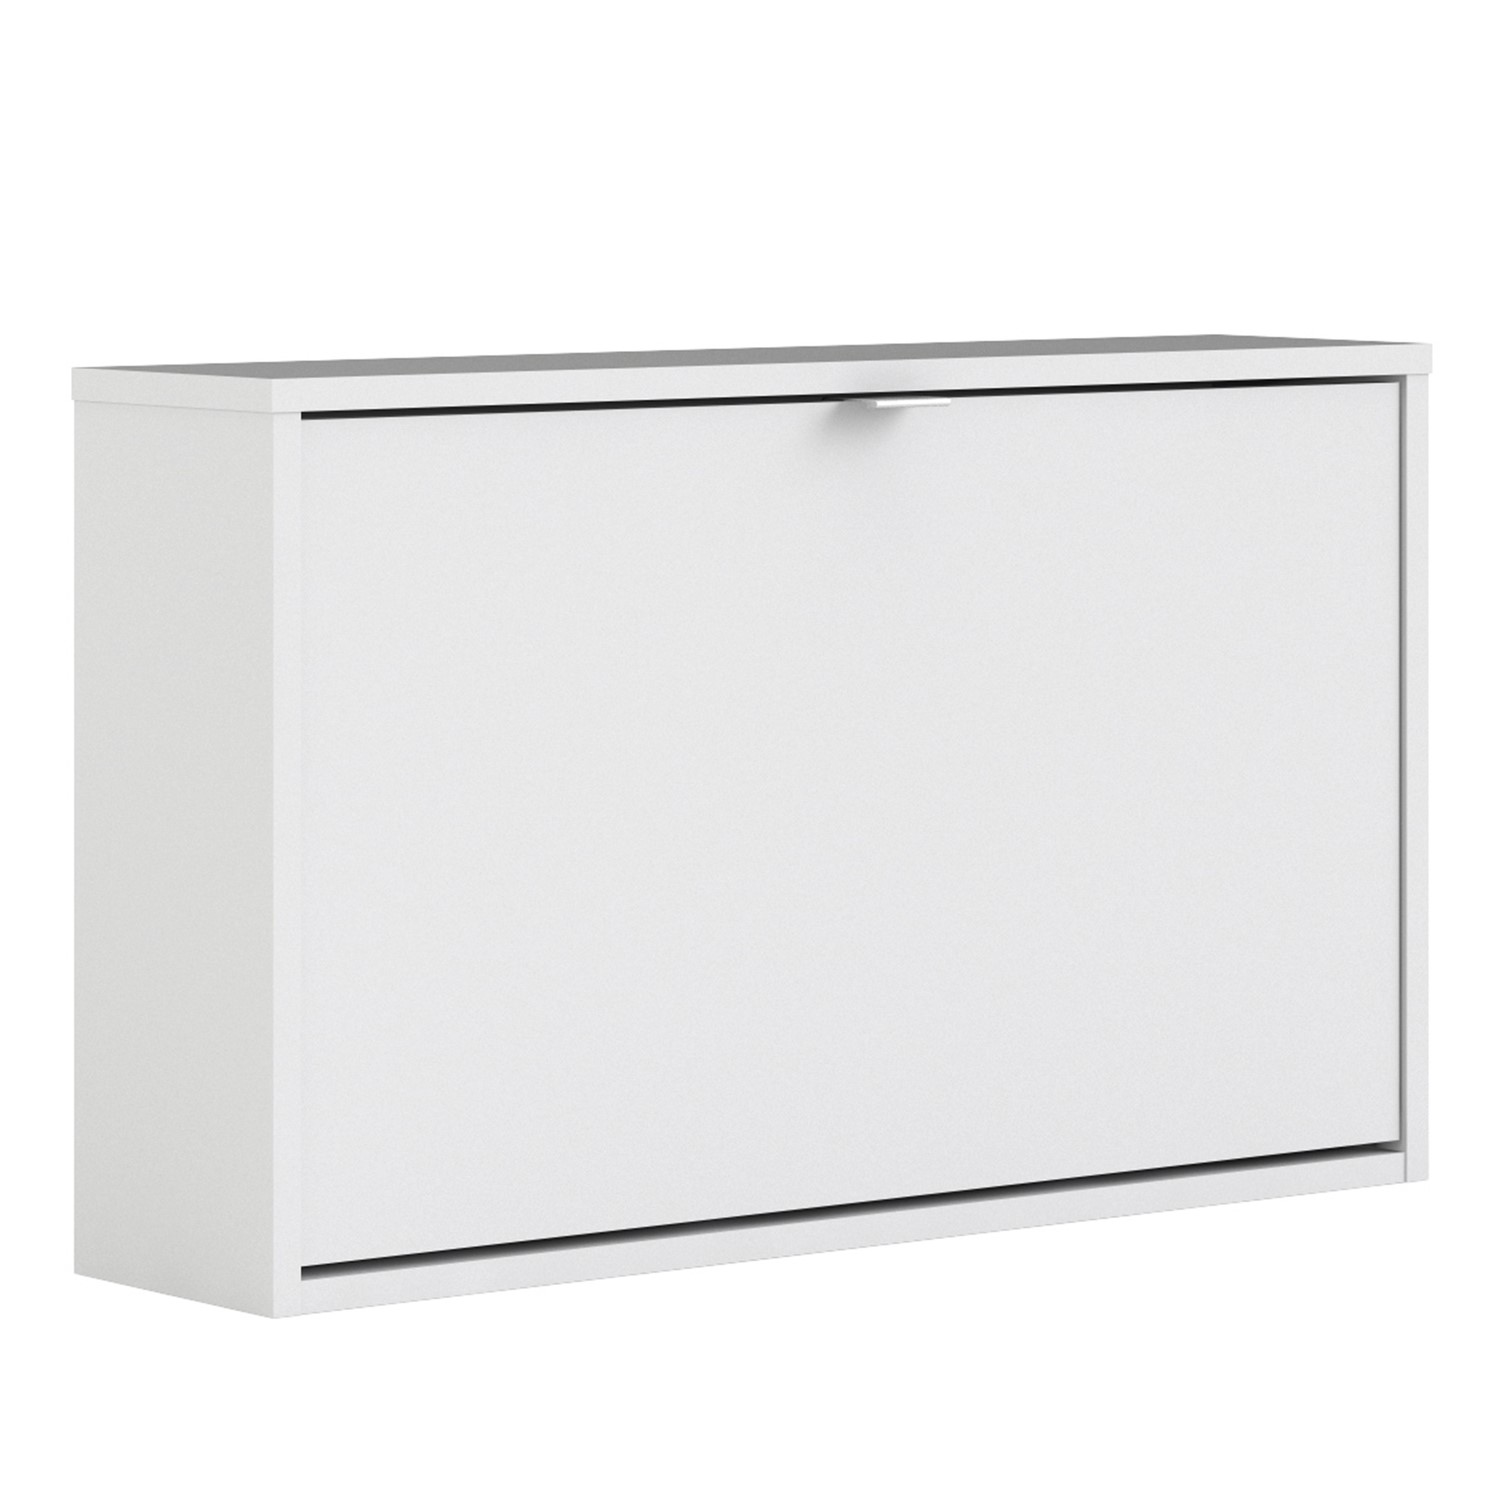 Photo of Slim white wall hung shoe cabinet - 3 pairs